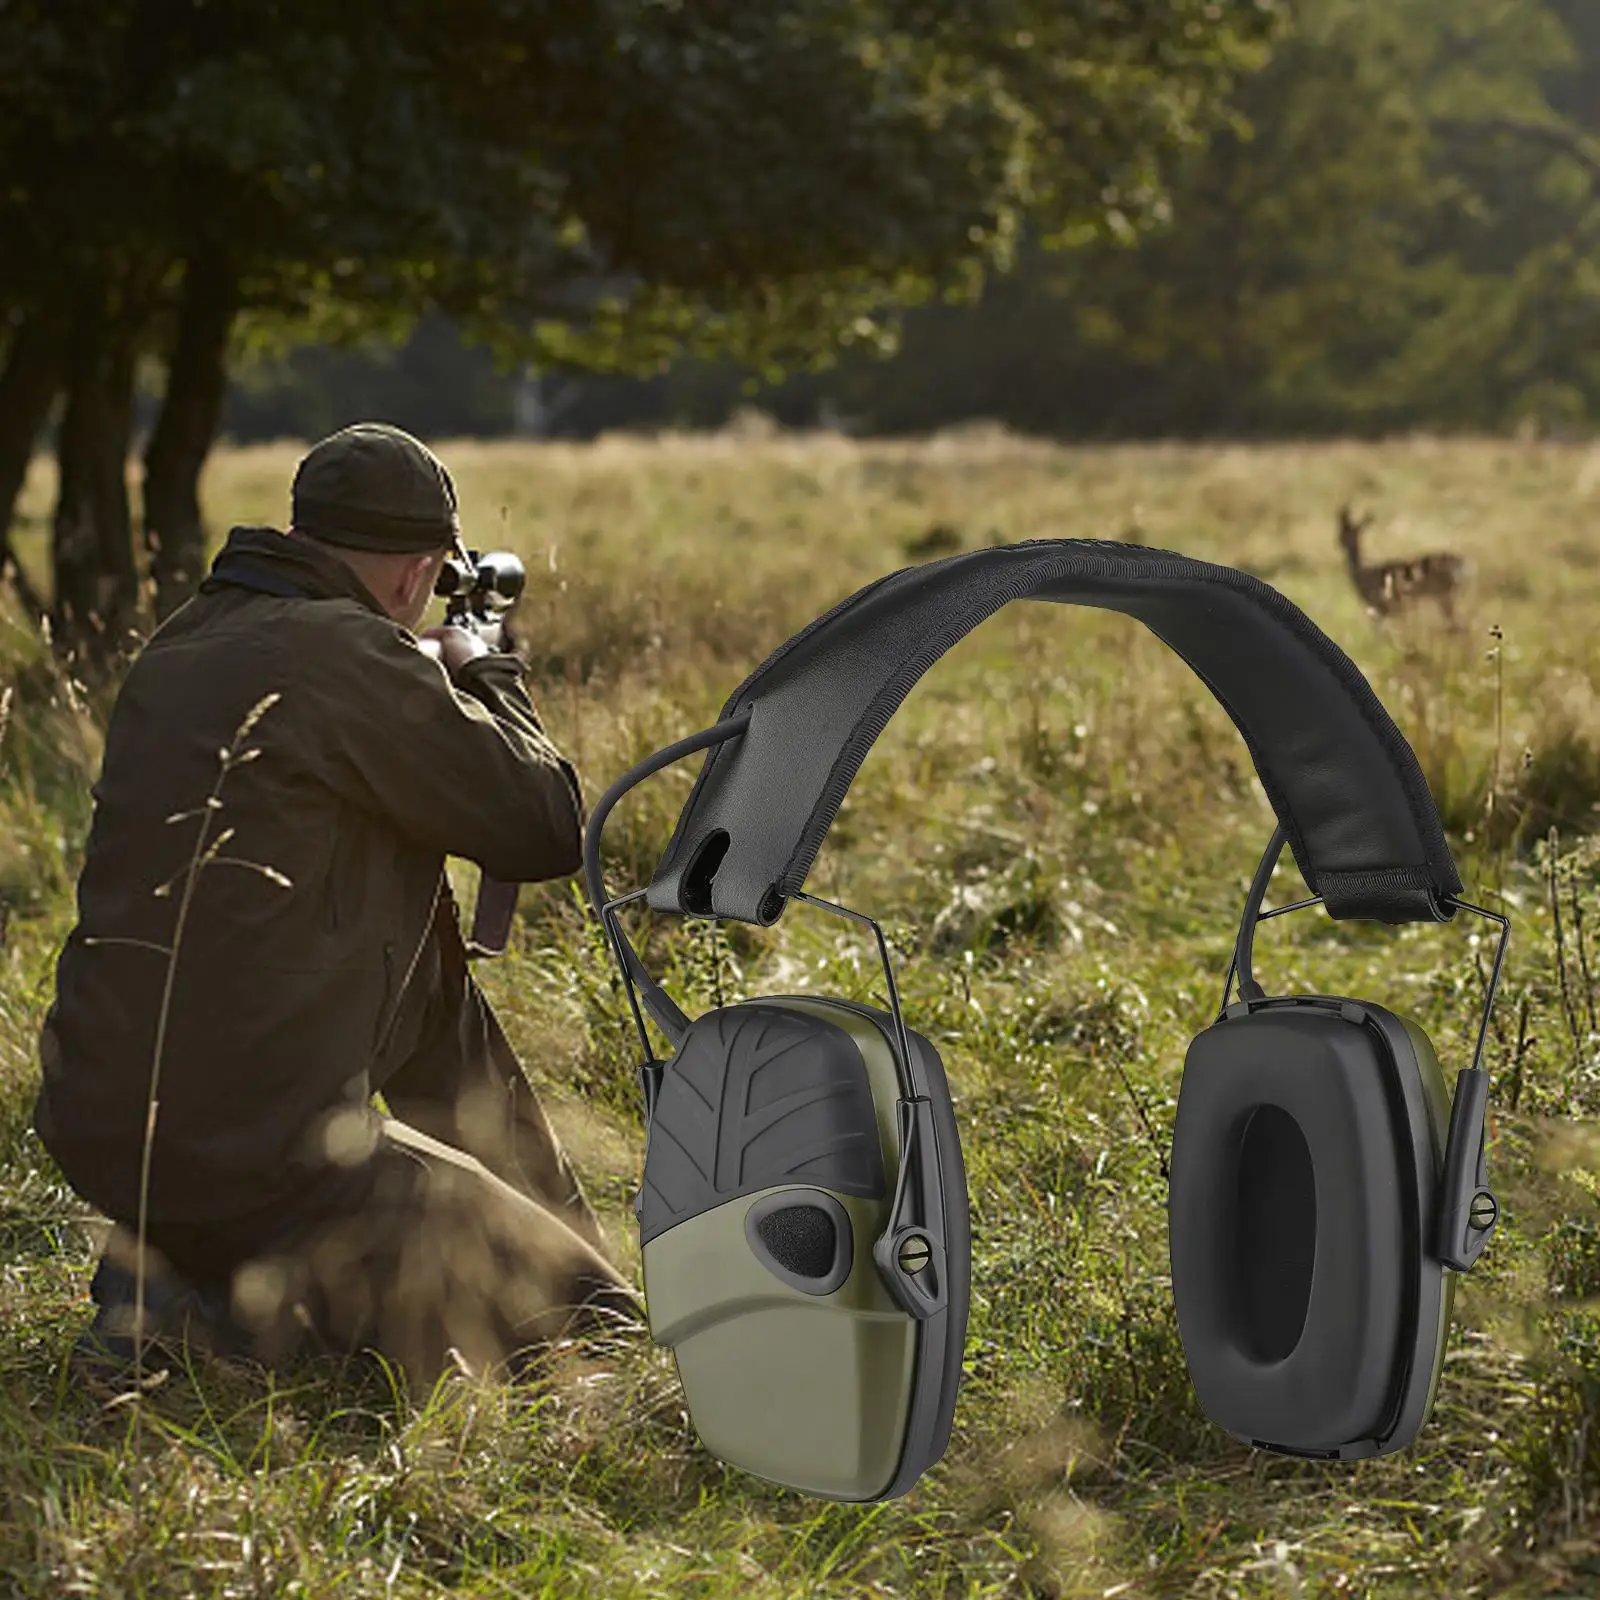 Head Mounted Hearing Protection Earmuff Folding Headphones Ear Plugs Noise Reduction Protective Headset for Mowing Gameing